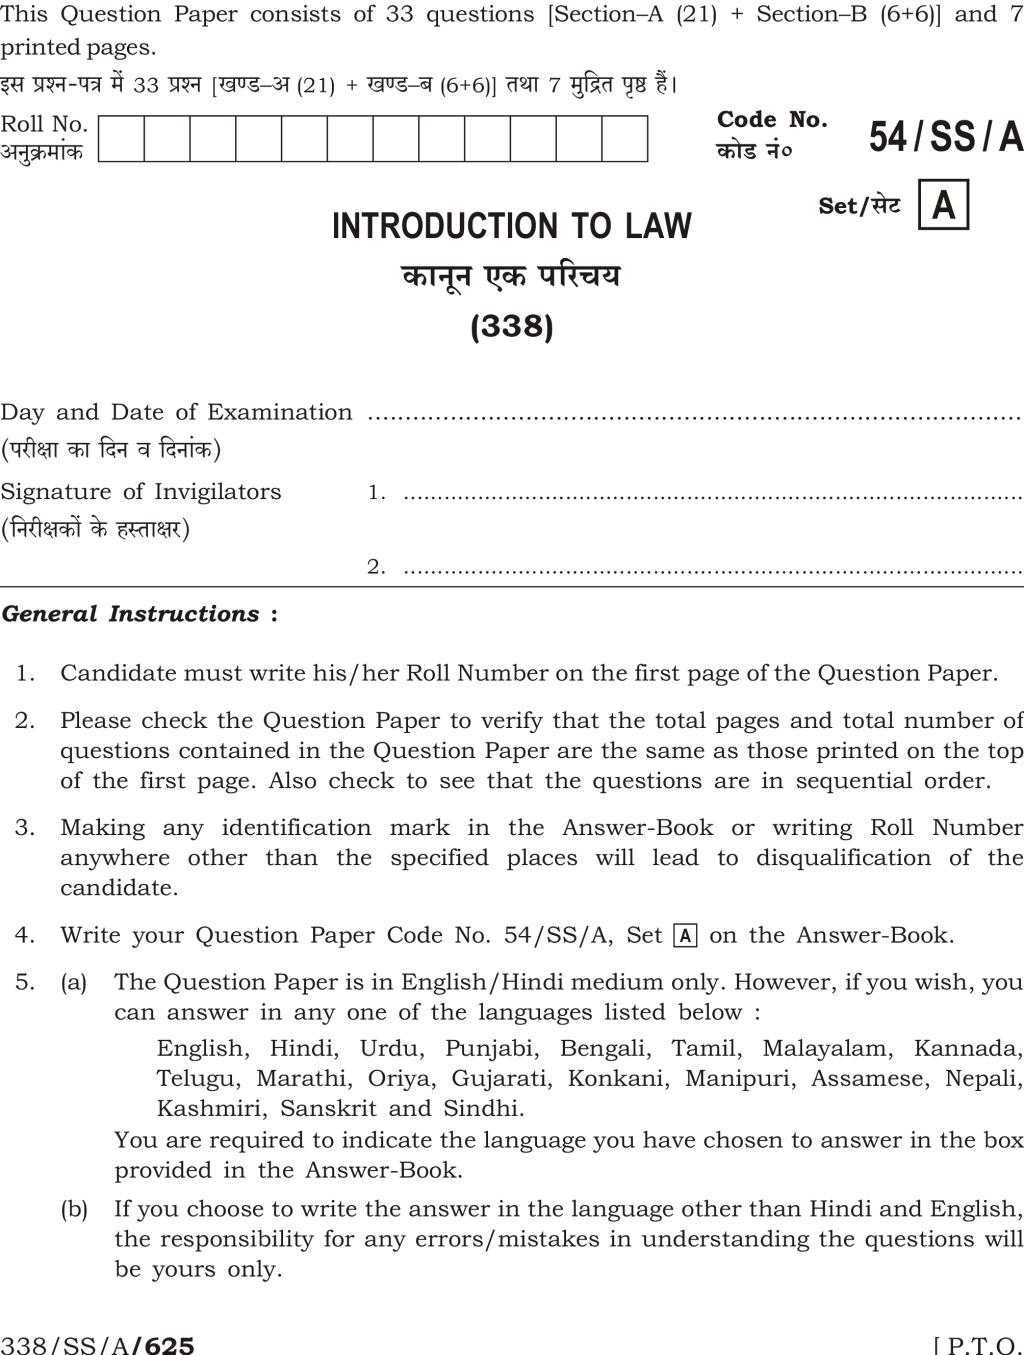 NIOS Class 12 Question Paper Apr 2017 - Introduction To Laws - Page 1